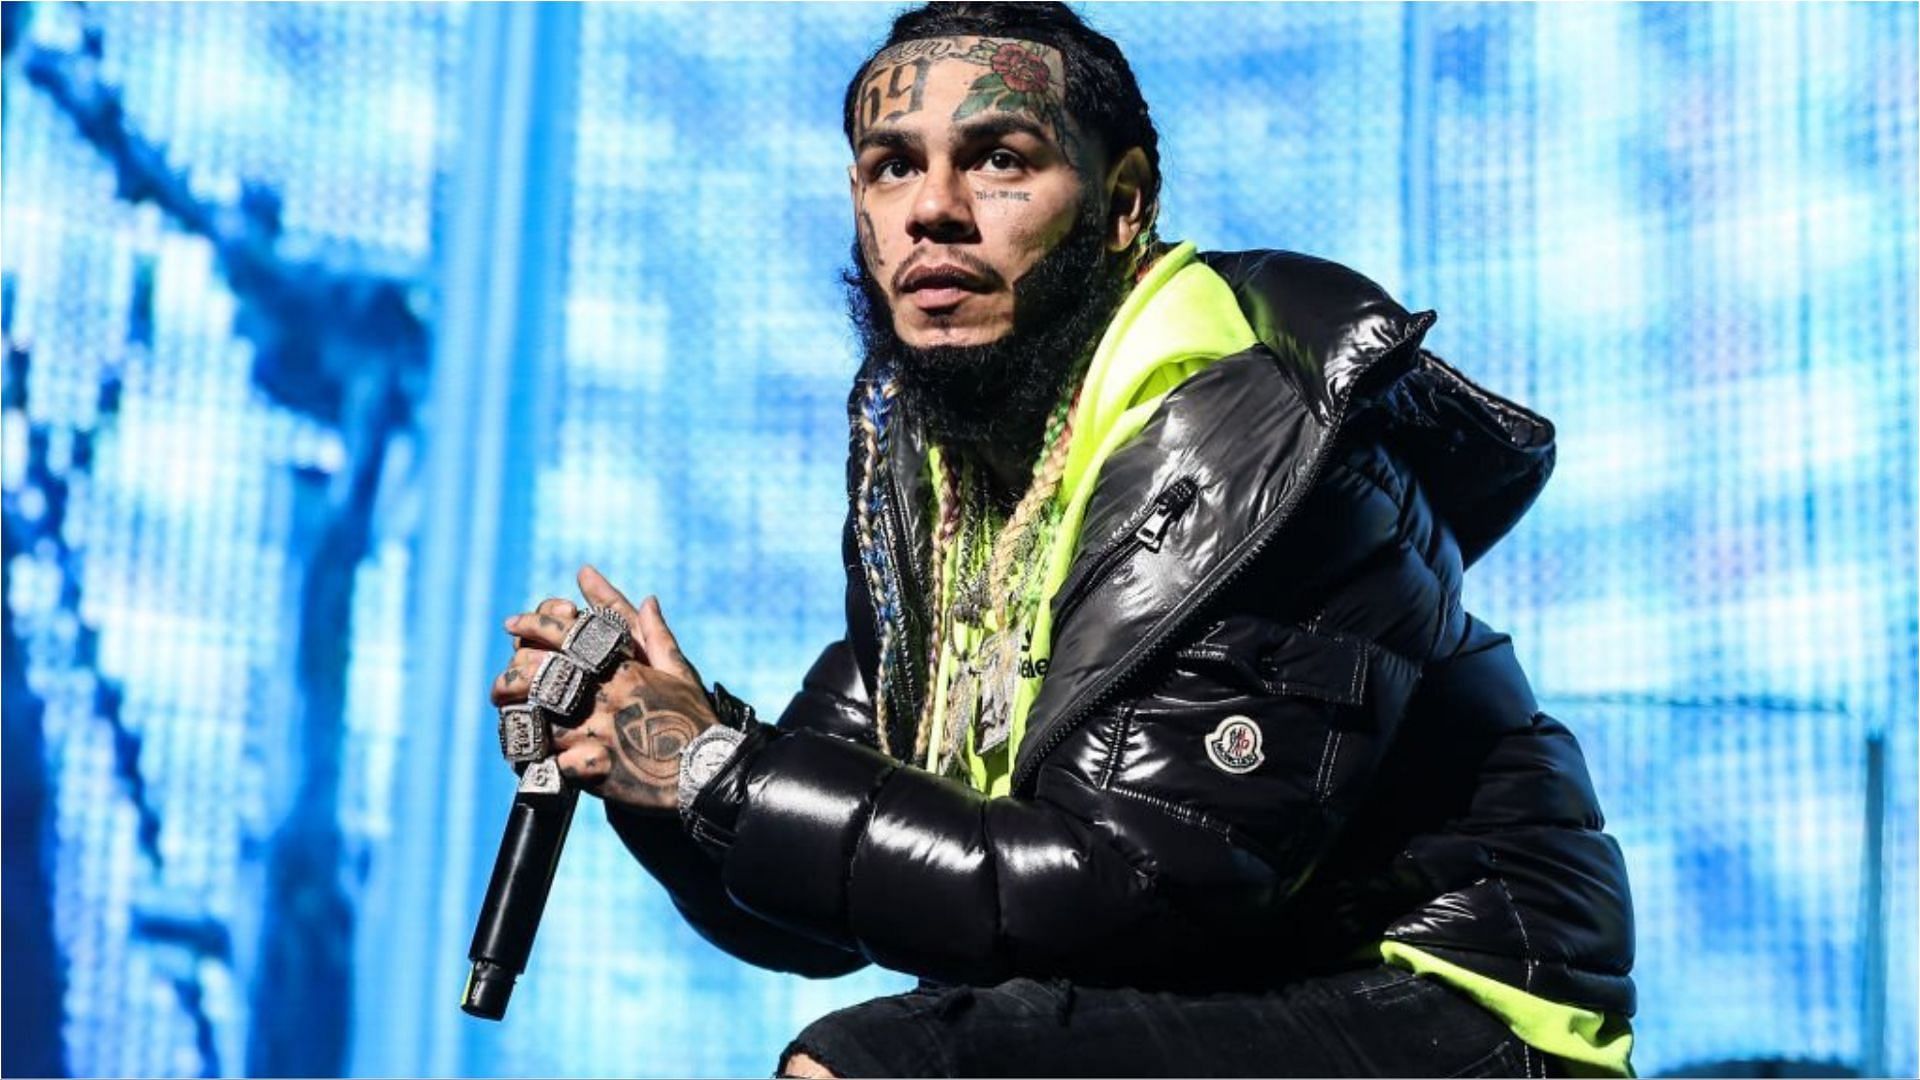 The video of 6ix9ine has gone viral on social media (Image via John Parra/Getty Images)